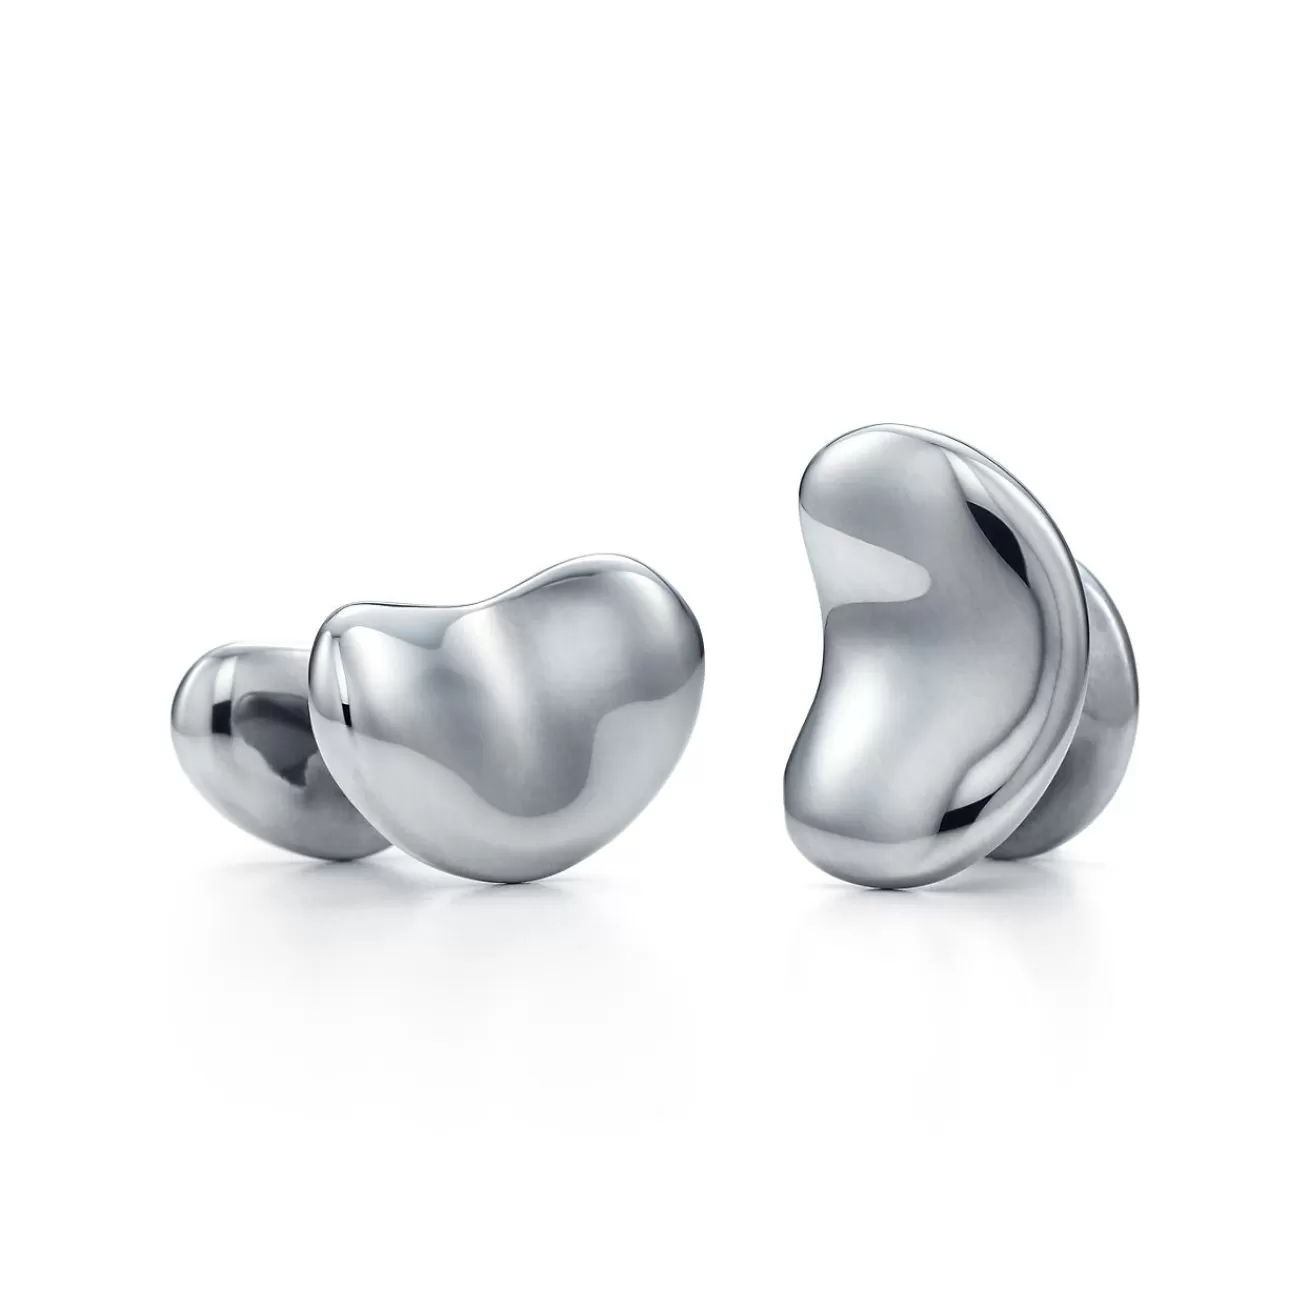 Tiffany & Co. Elsa Peretti® Bean® design Cuff Links in Charcoal-color Ruthenium, 18 mm | ^ Him | Gifts for Him